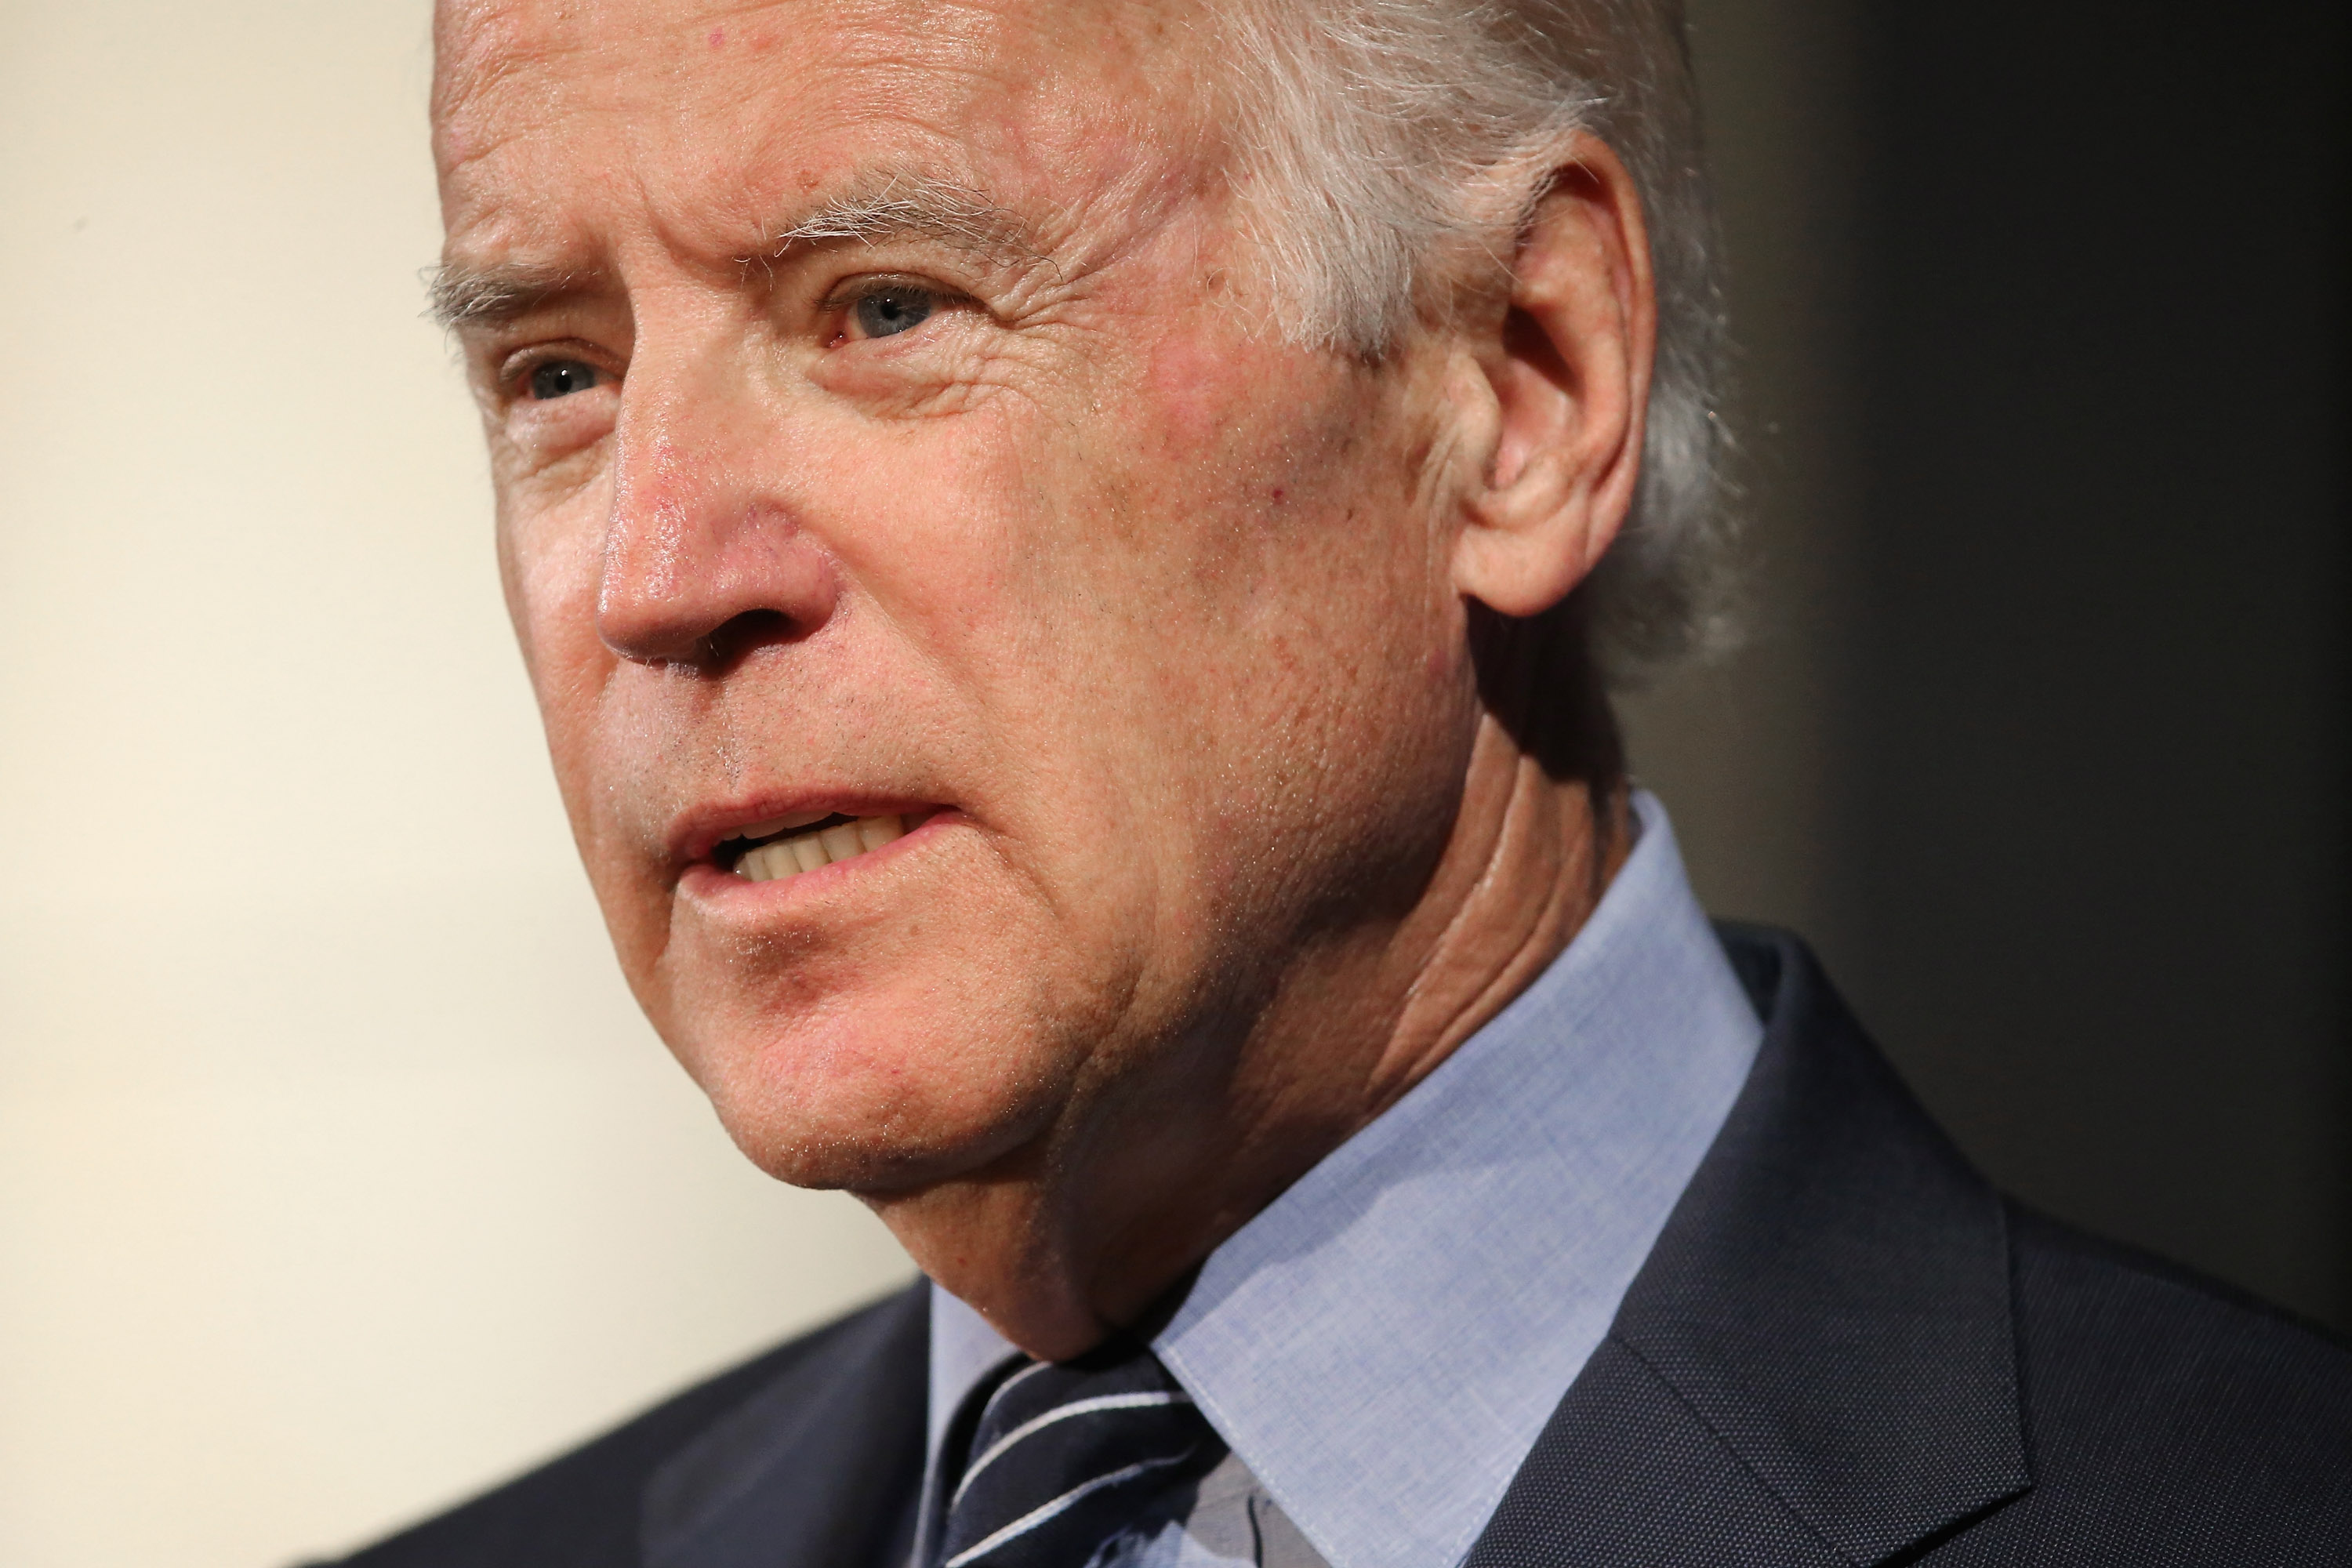 Joe Biden at the U.S. Chamber of Commerce on July 13, 2015 in Washington, DC. (Chip Somodevilla—Getty Images)